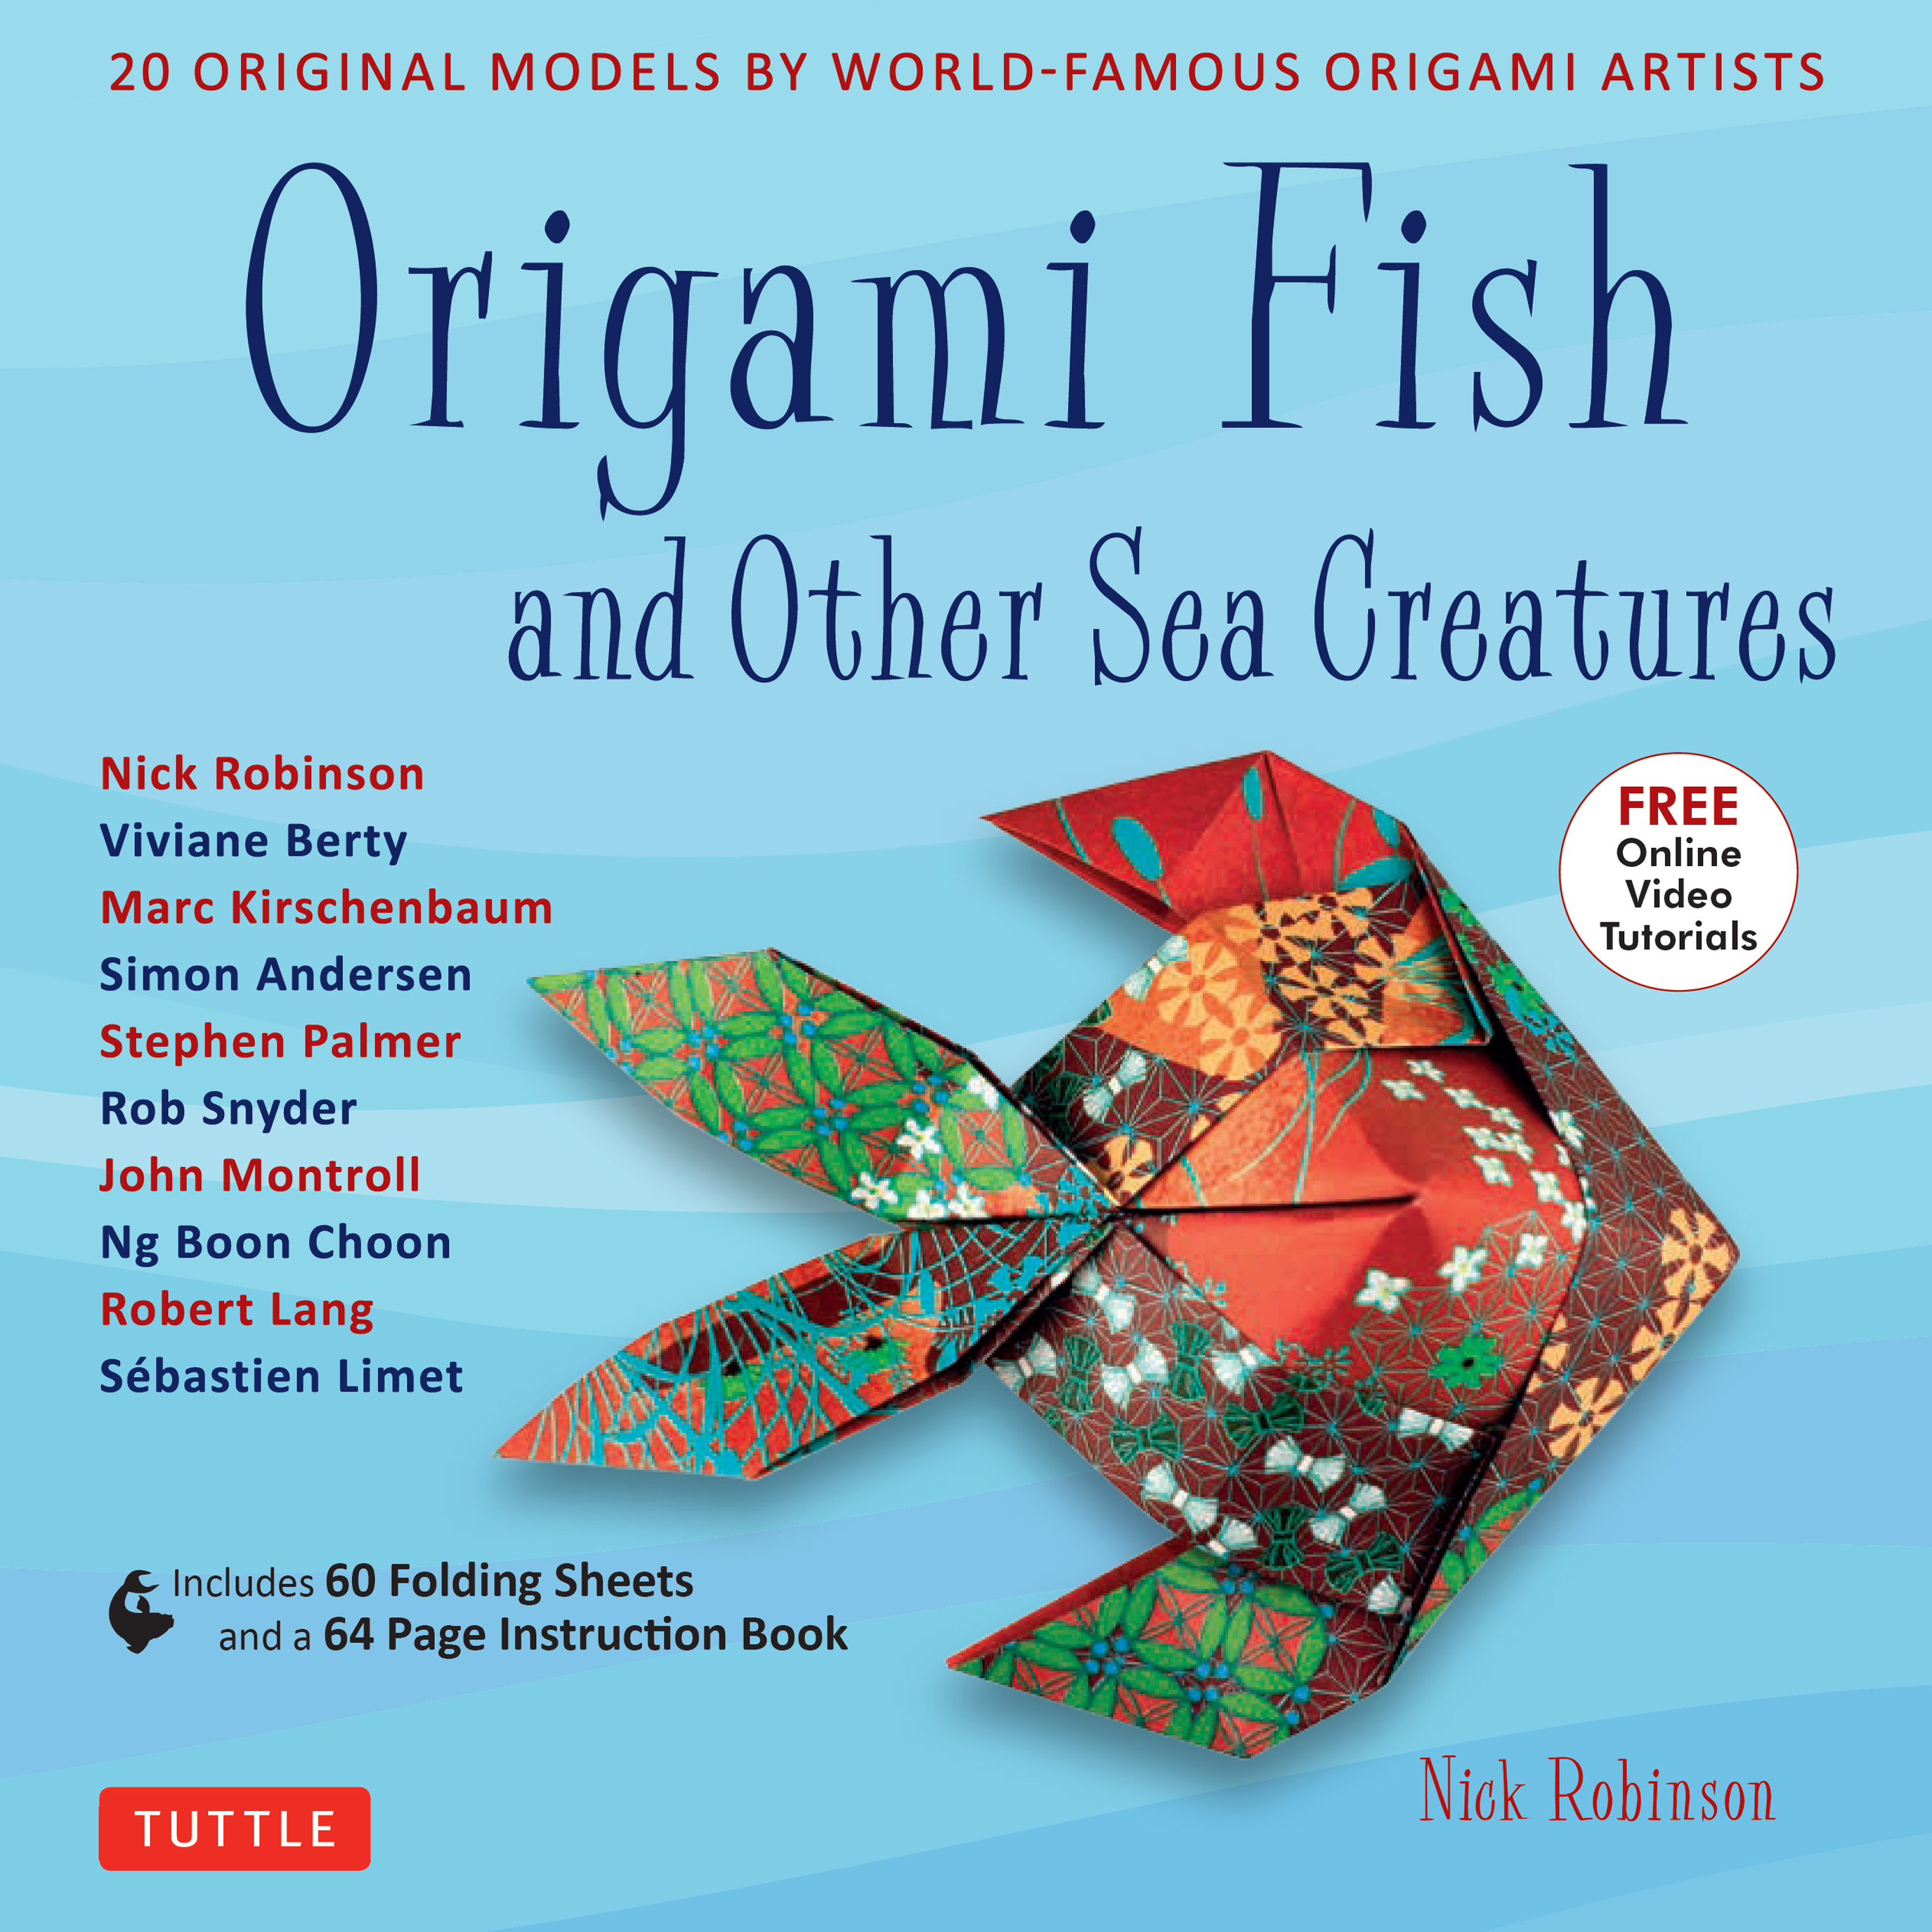 Origami Fish Instructions Origami Fish And Other Sea Creatures Ebook